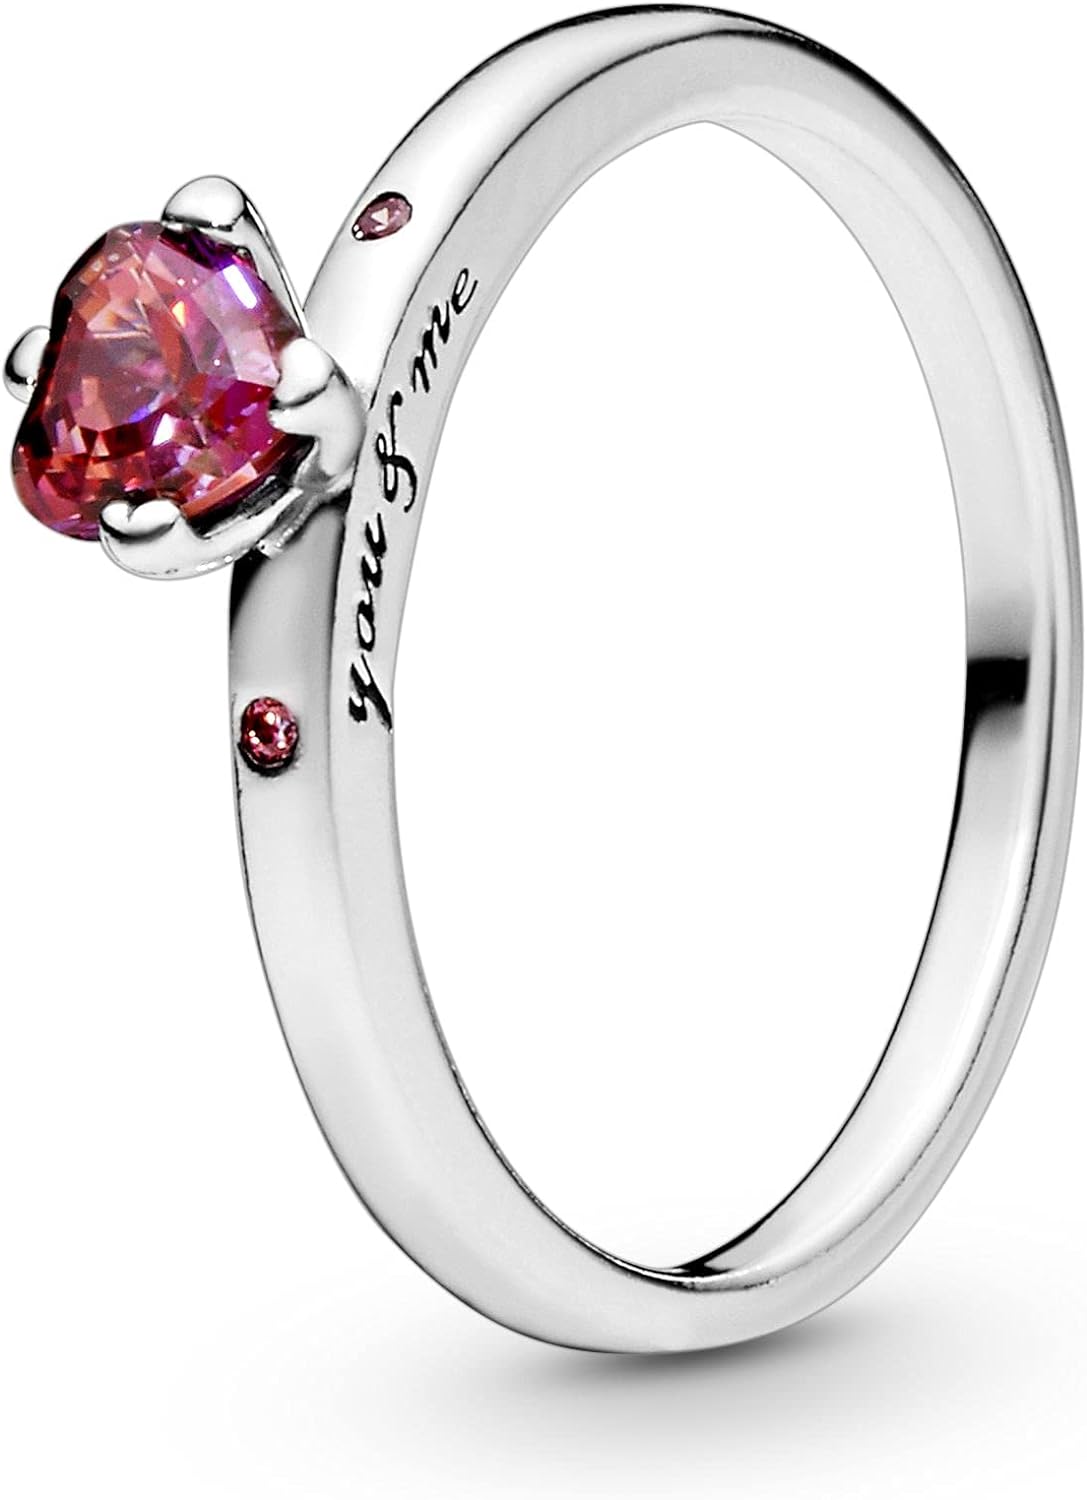 Pandora You  Me Sparkling Red Heart Ring - Sterling Silver Ring for Women - Layering or Stackable Ring - Gift for Her - Sterling Silver with Red Cubic Zirconia